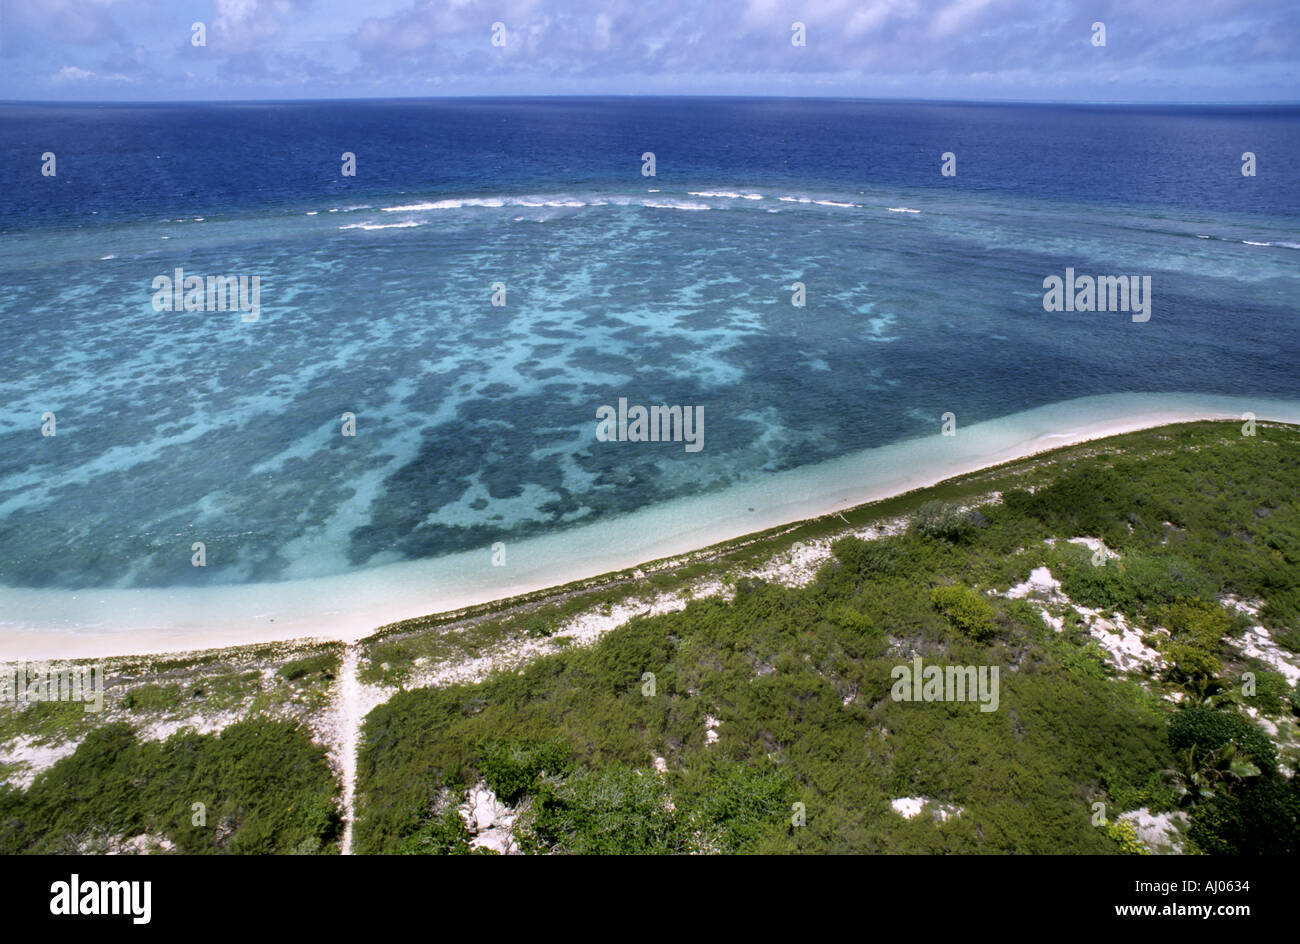 Coral reef along the shore of Amedee Island, New Caledonia, Pacific Ocean. Stock Photo